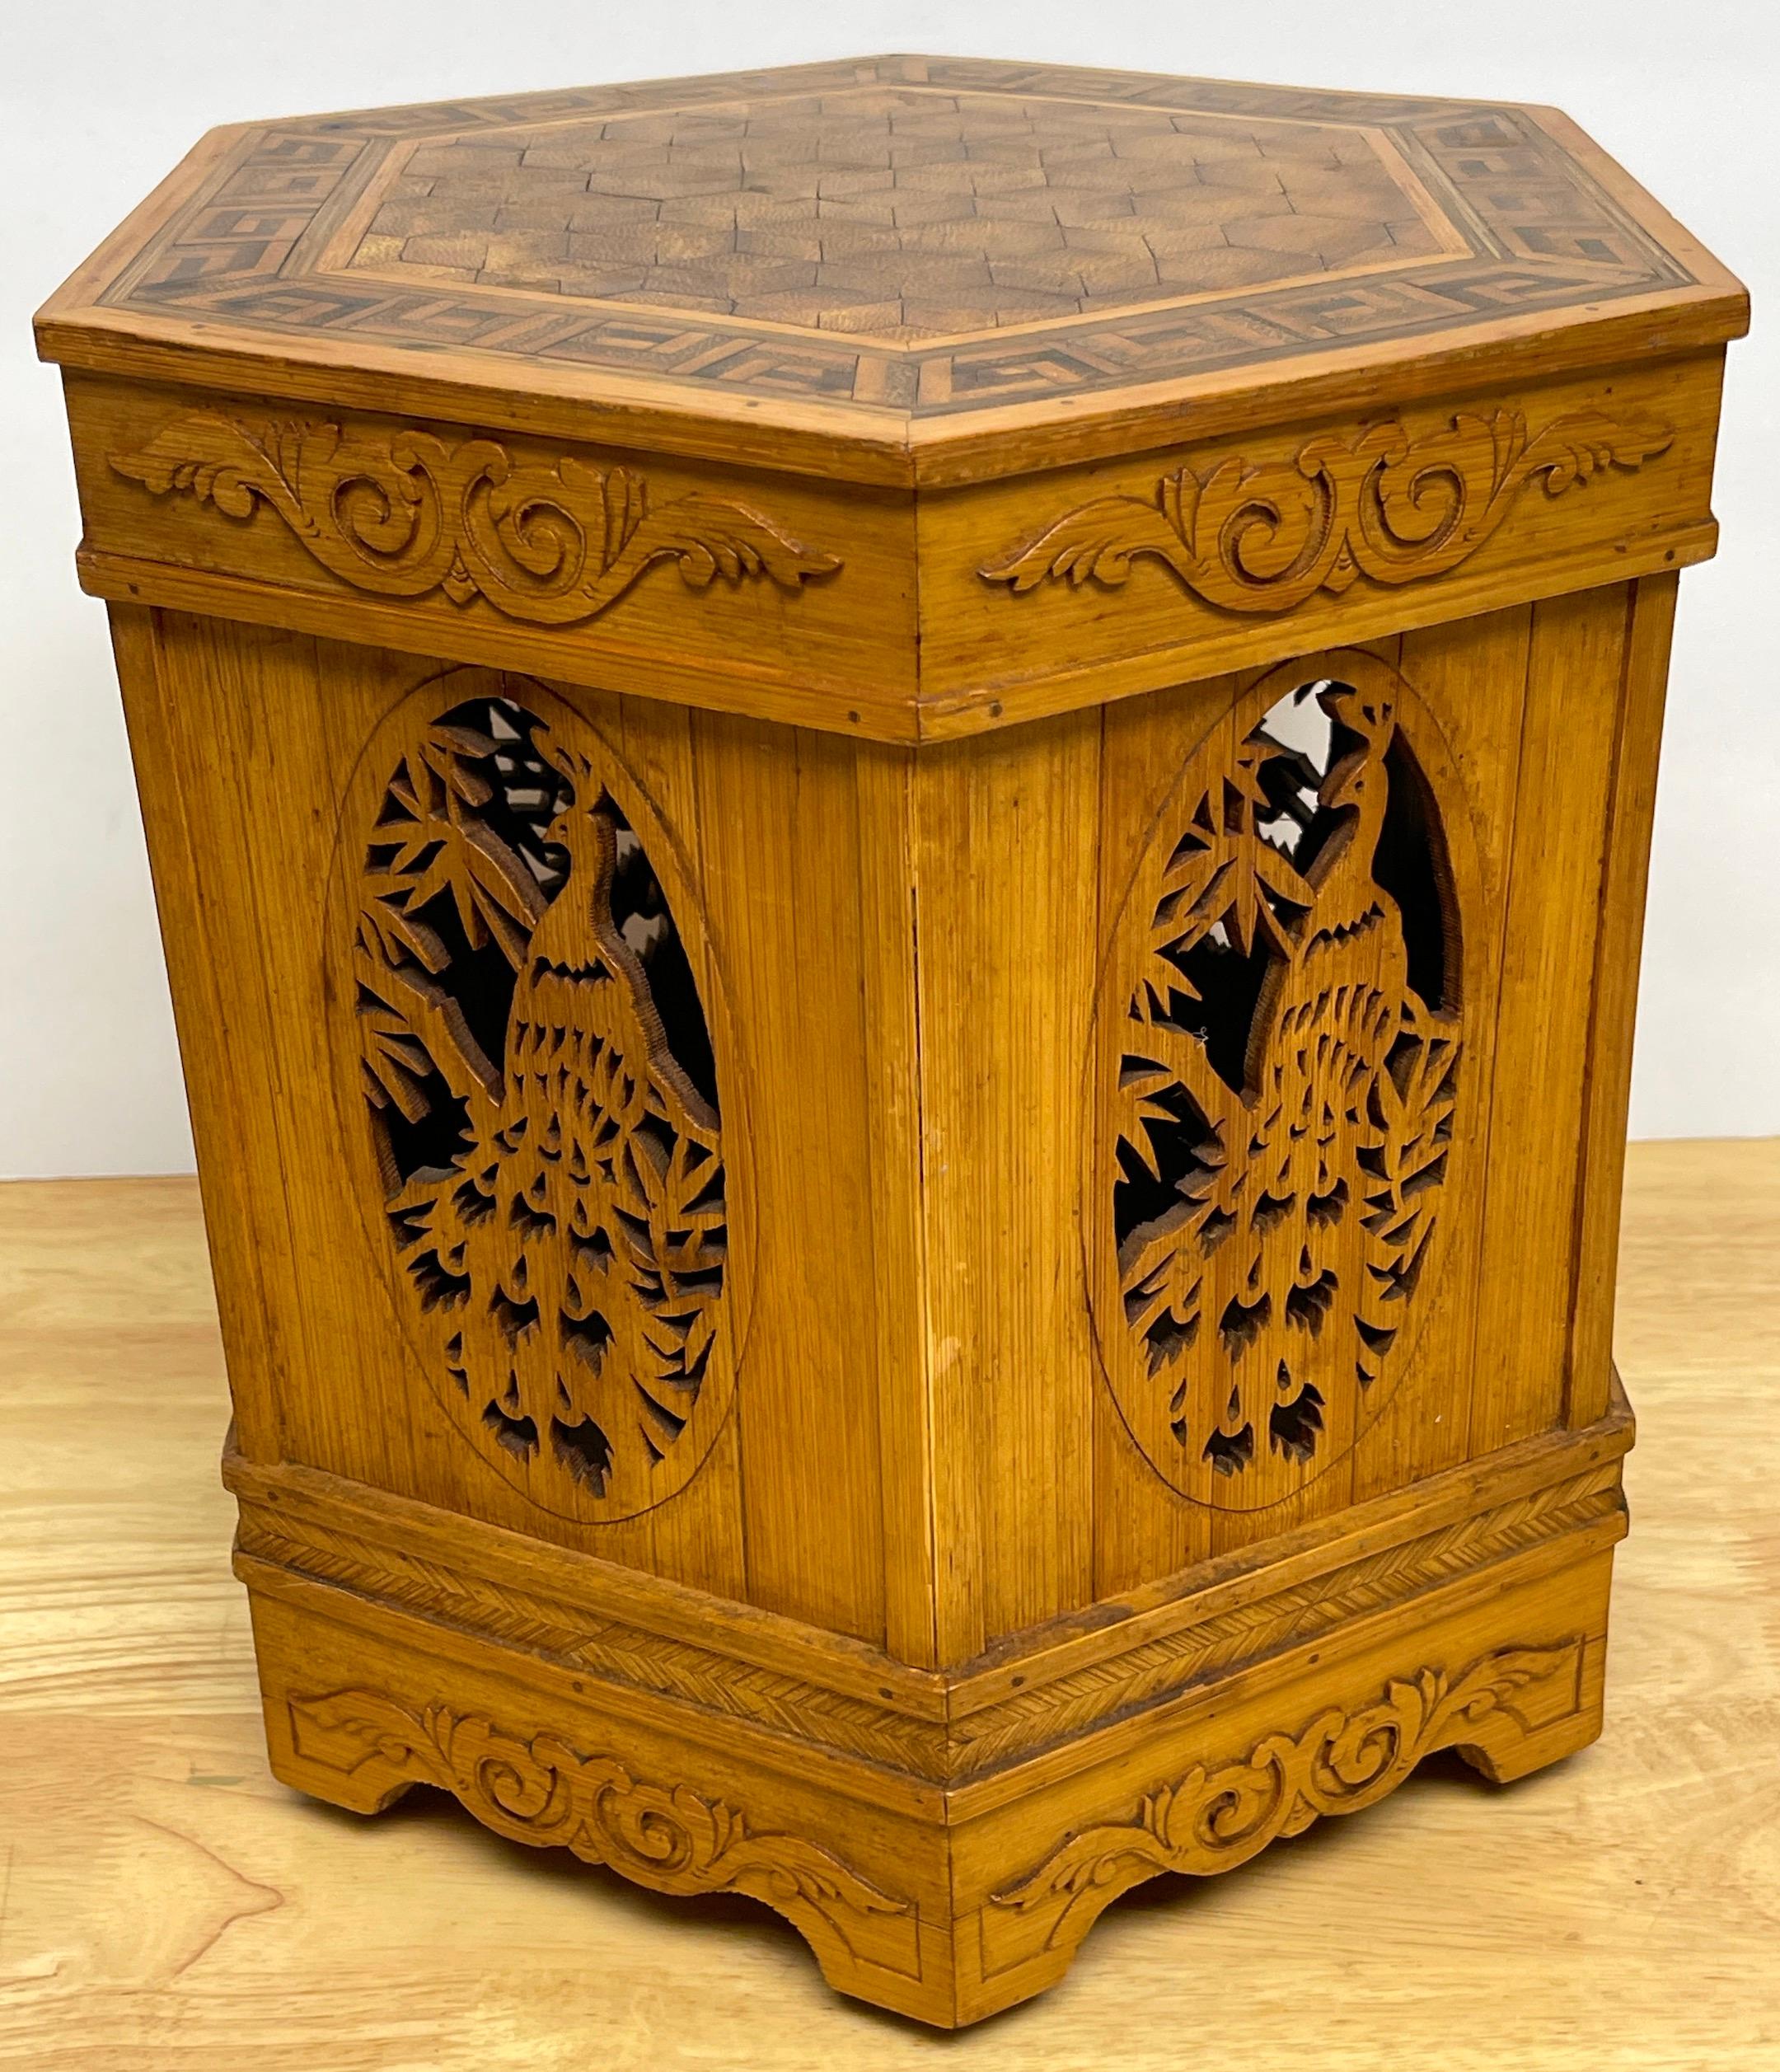 19th Century Diminutive American Aesthetic Movement Peacock Motif Pedestal of Side Table   For Sale